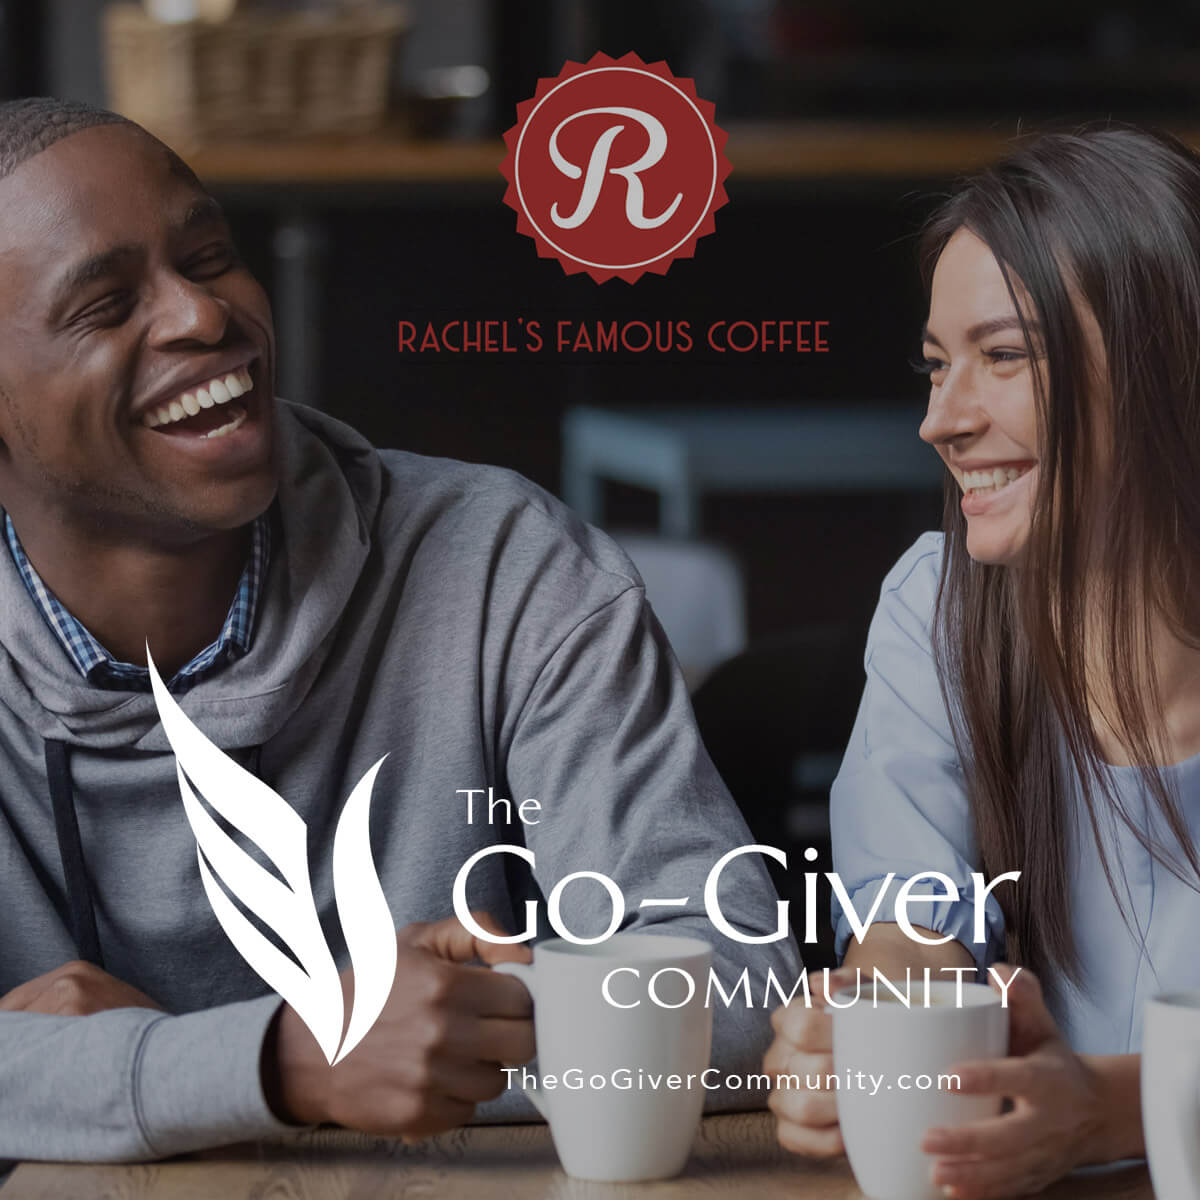 The Go-Giver Community